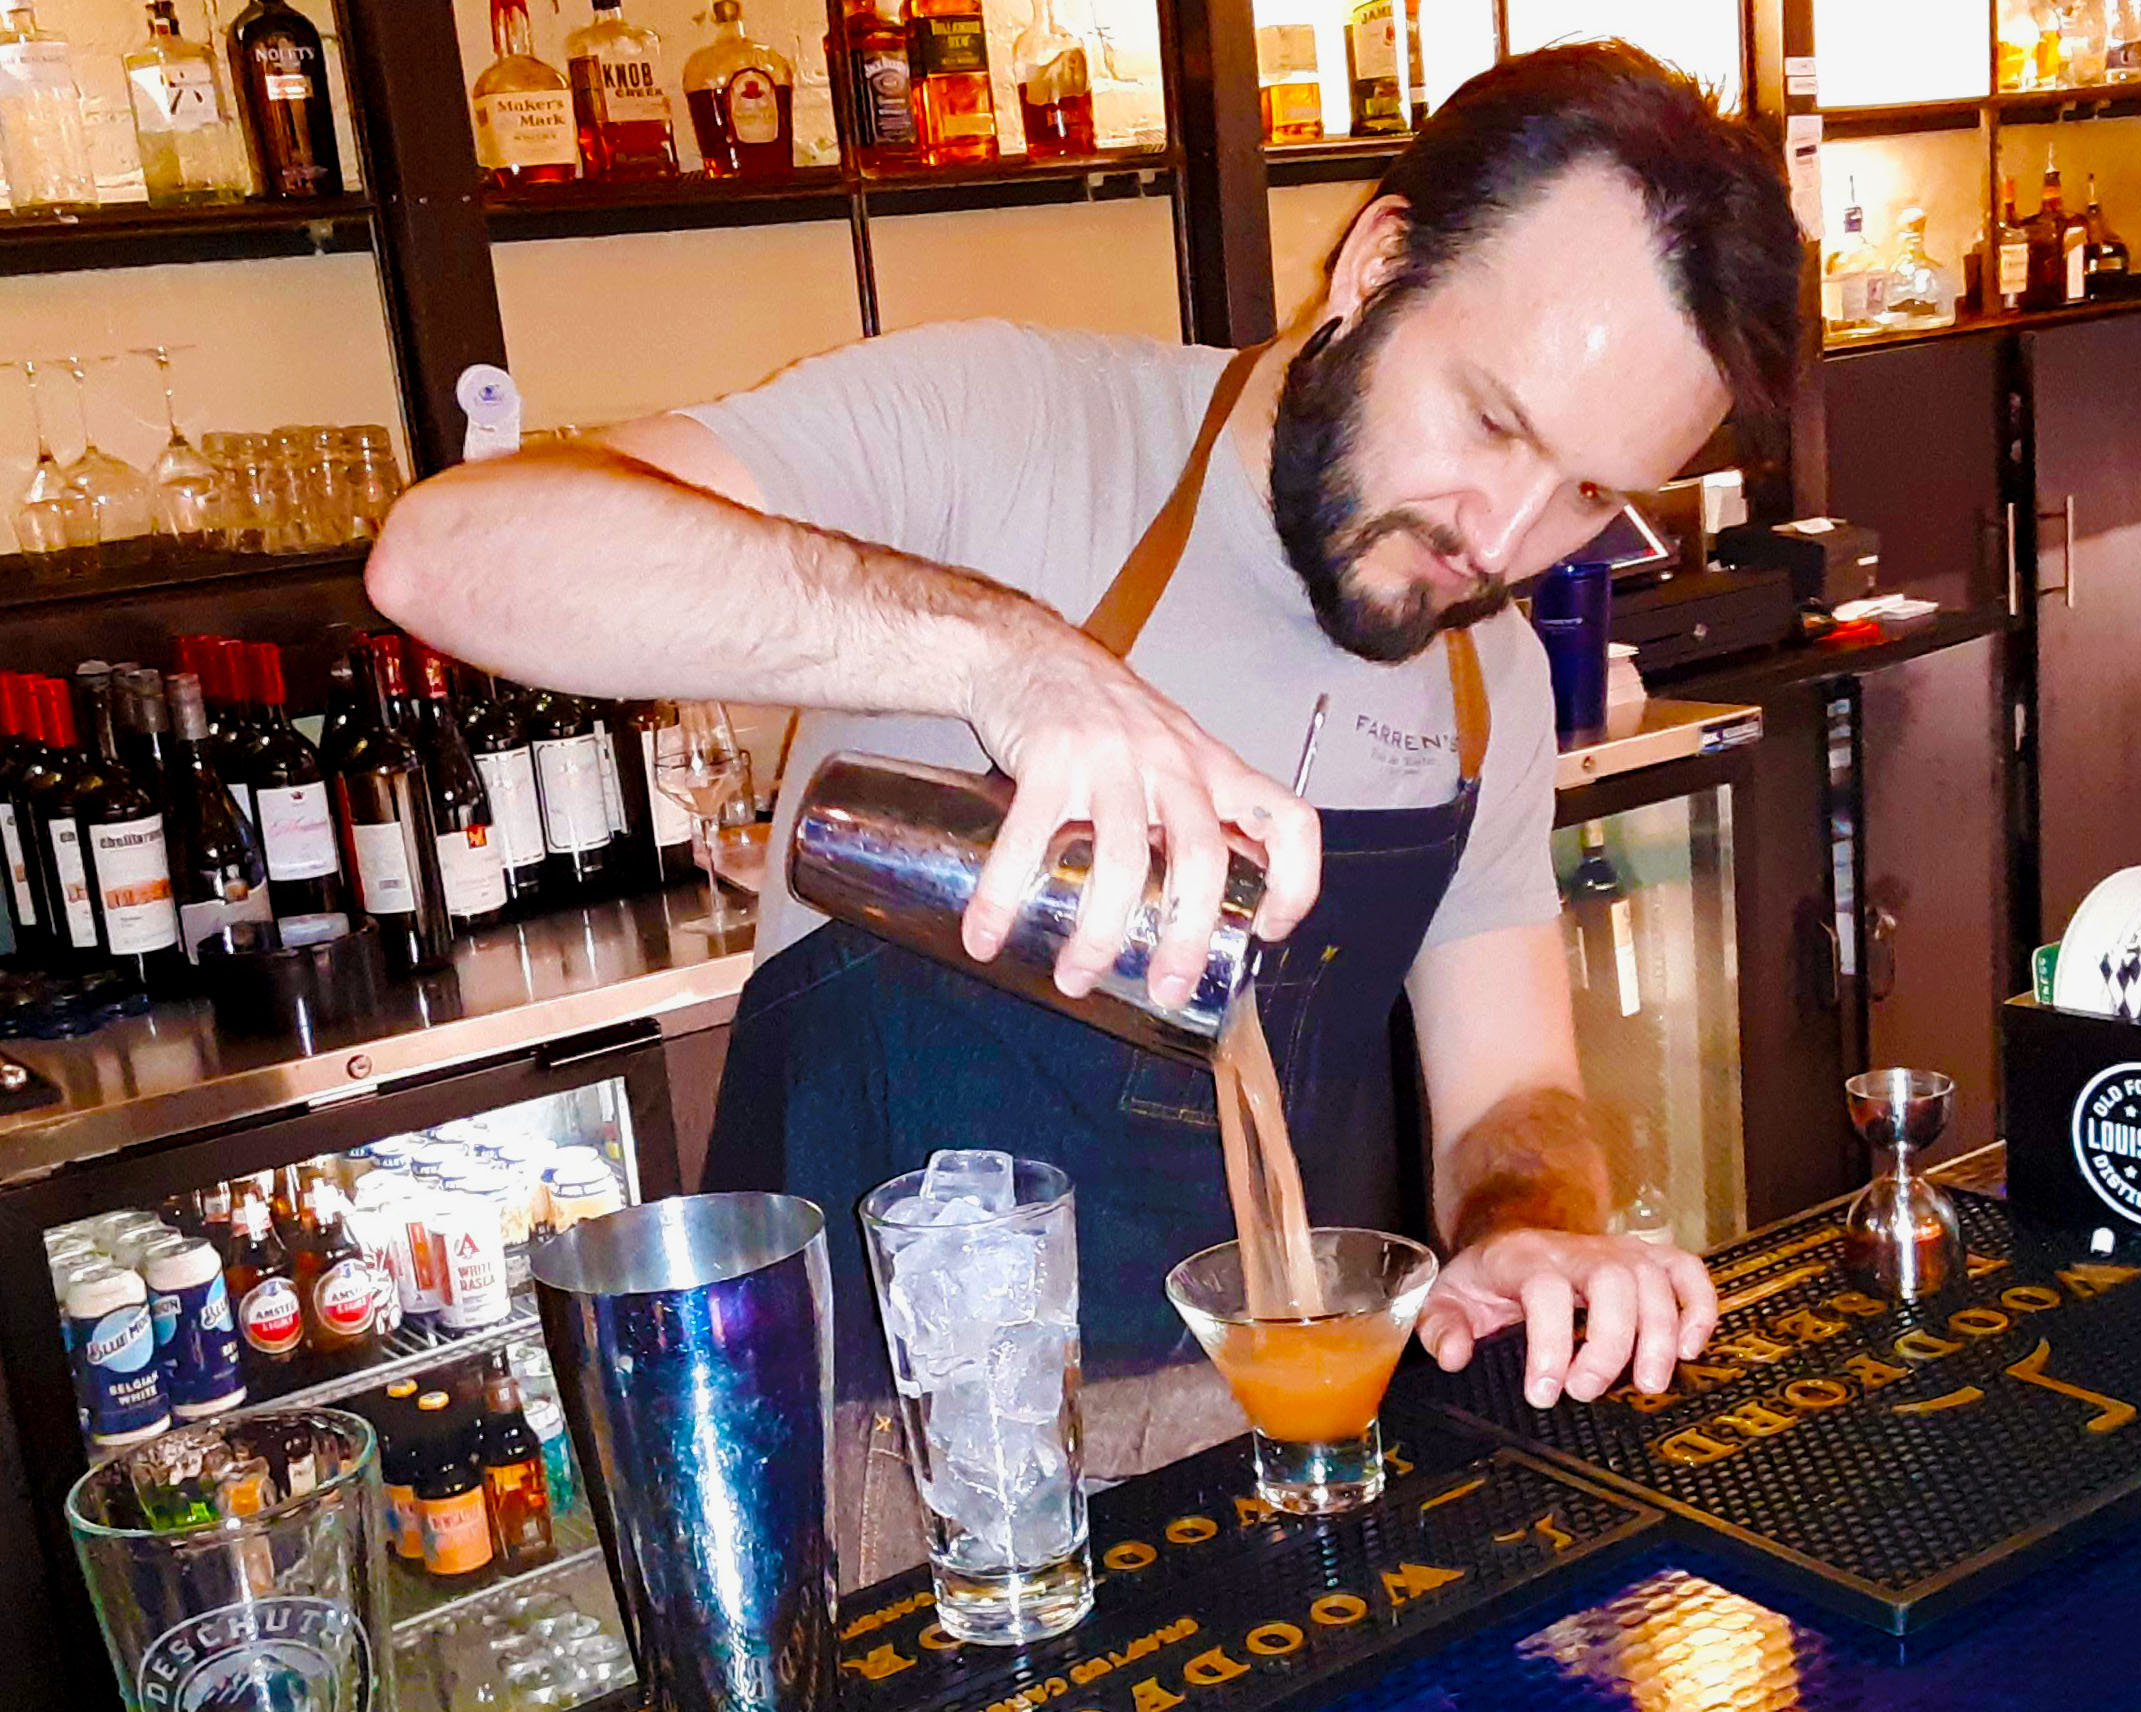 At Farren's Pub in Downtown Champaign, bartender Terry Boyer pours a cosmo into a half tumbler. Photo by Paul Young.